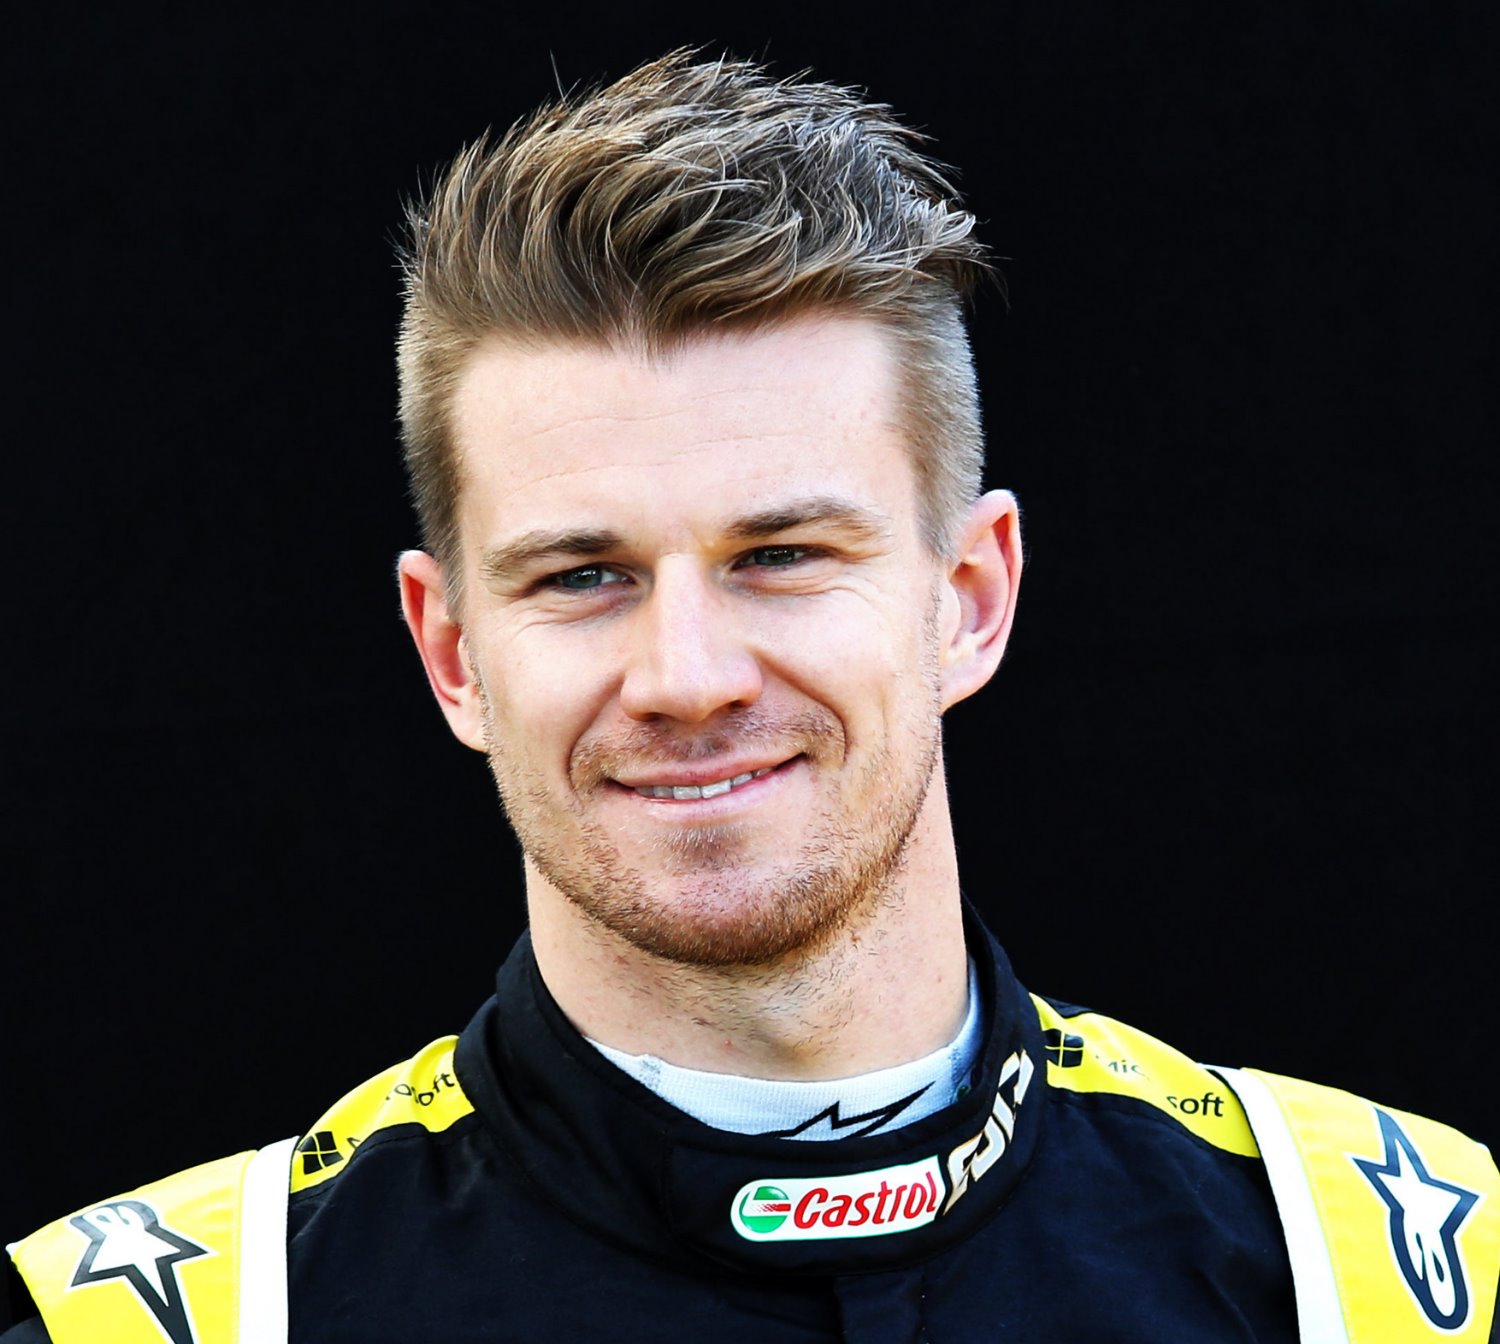 All these years in F1 and Hulkenberg doesn't even have a single podium to show for it. He was poised to score his first last Sunday in the closing laps but then crashed out like a complete wanker